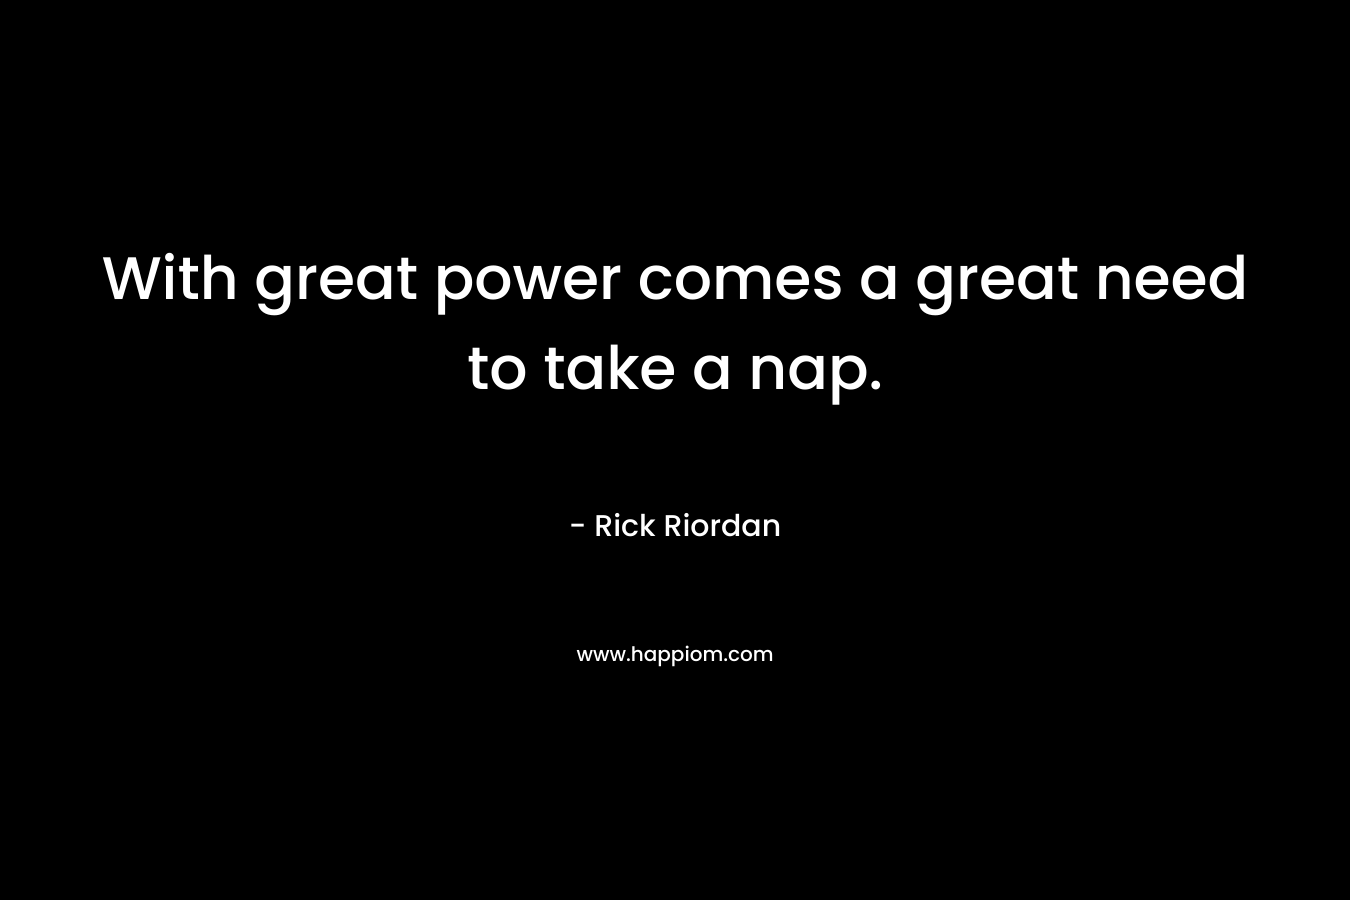 With great power comes a great need to take a nap. – Rick Riordan